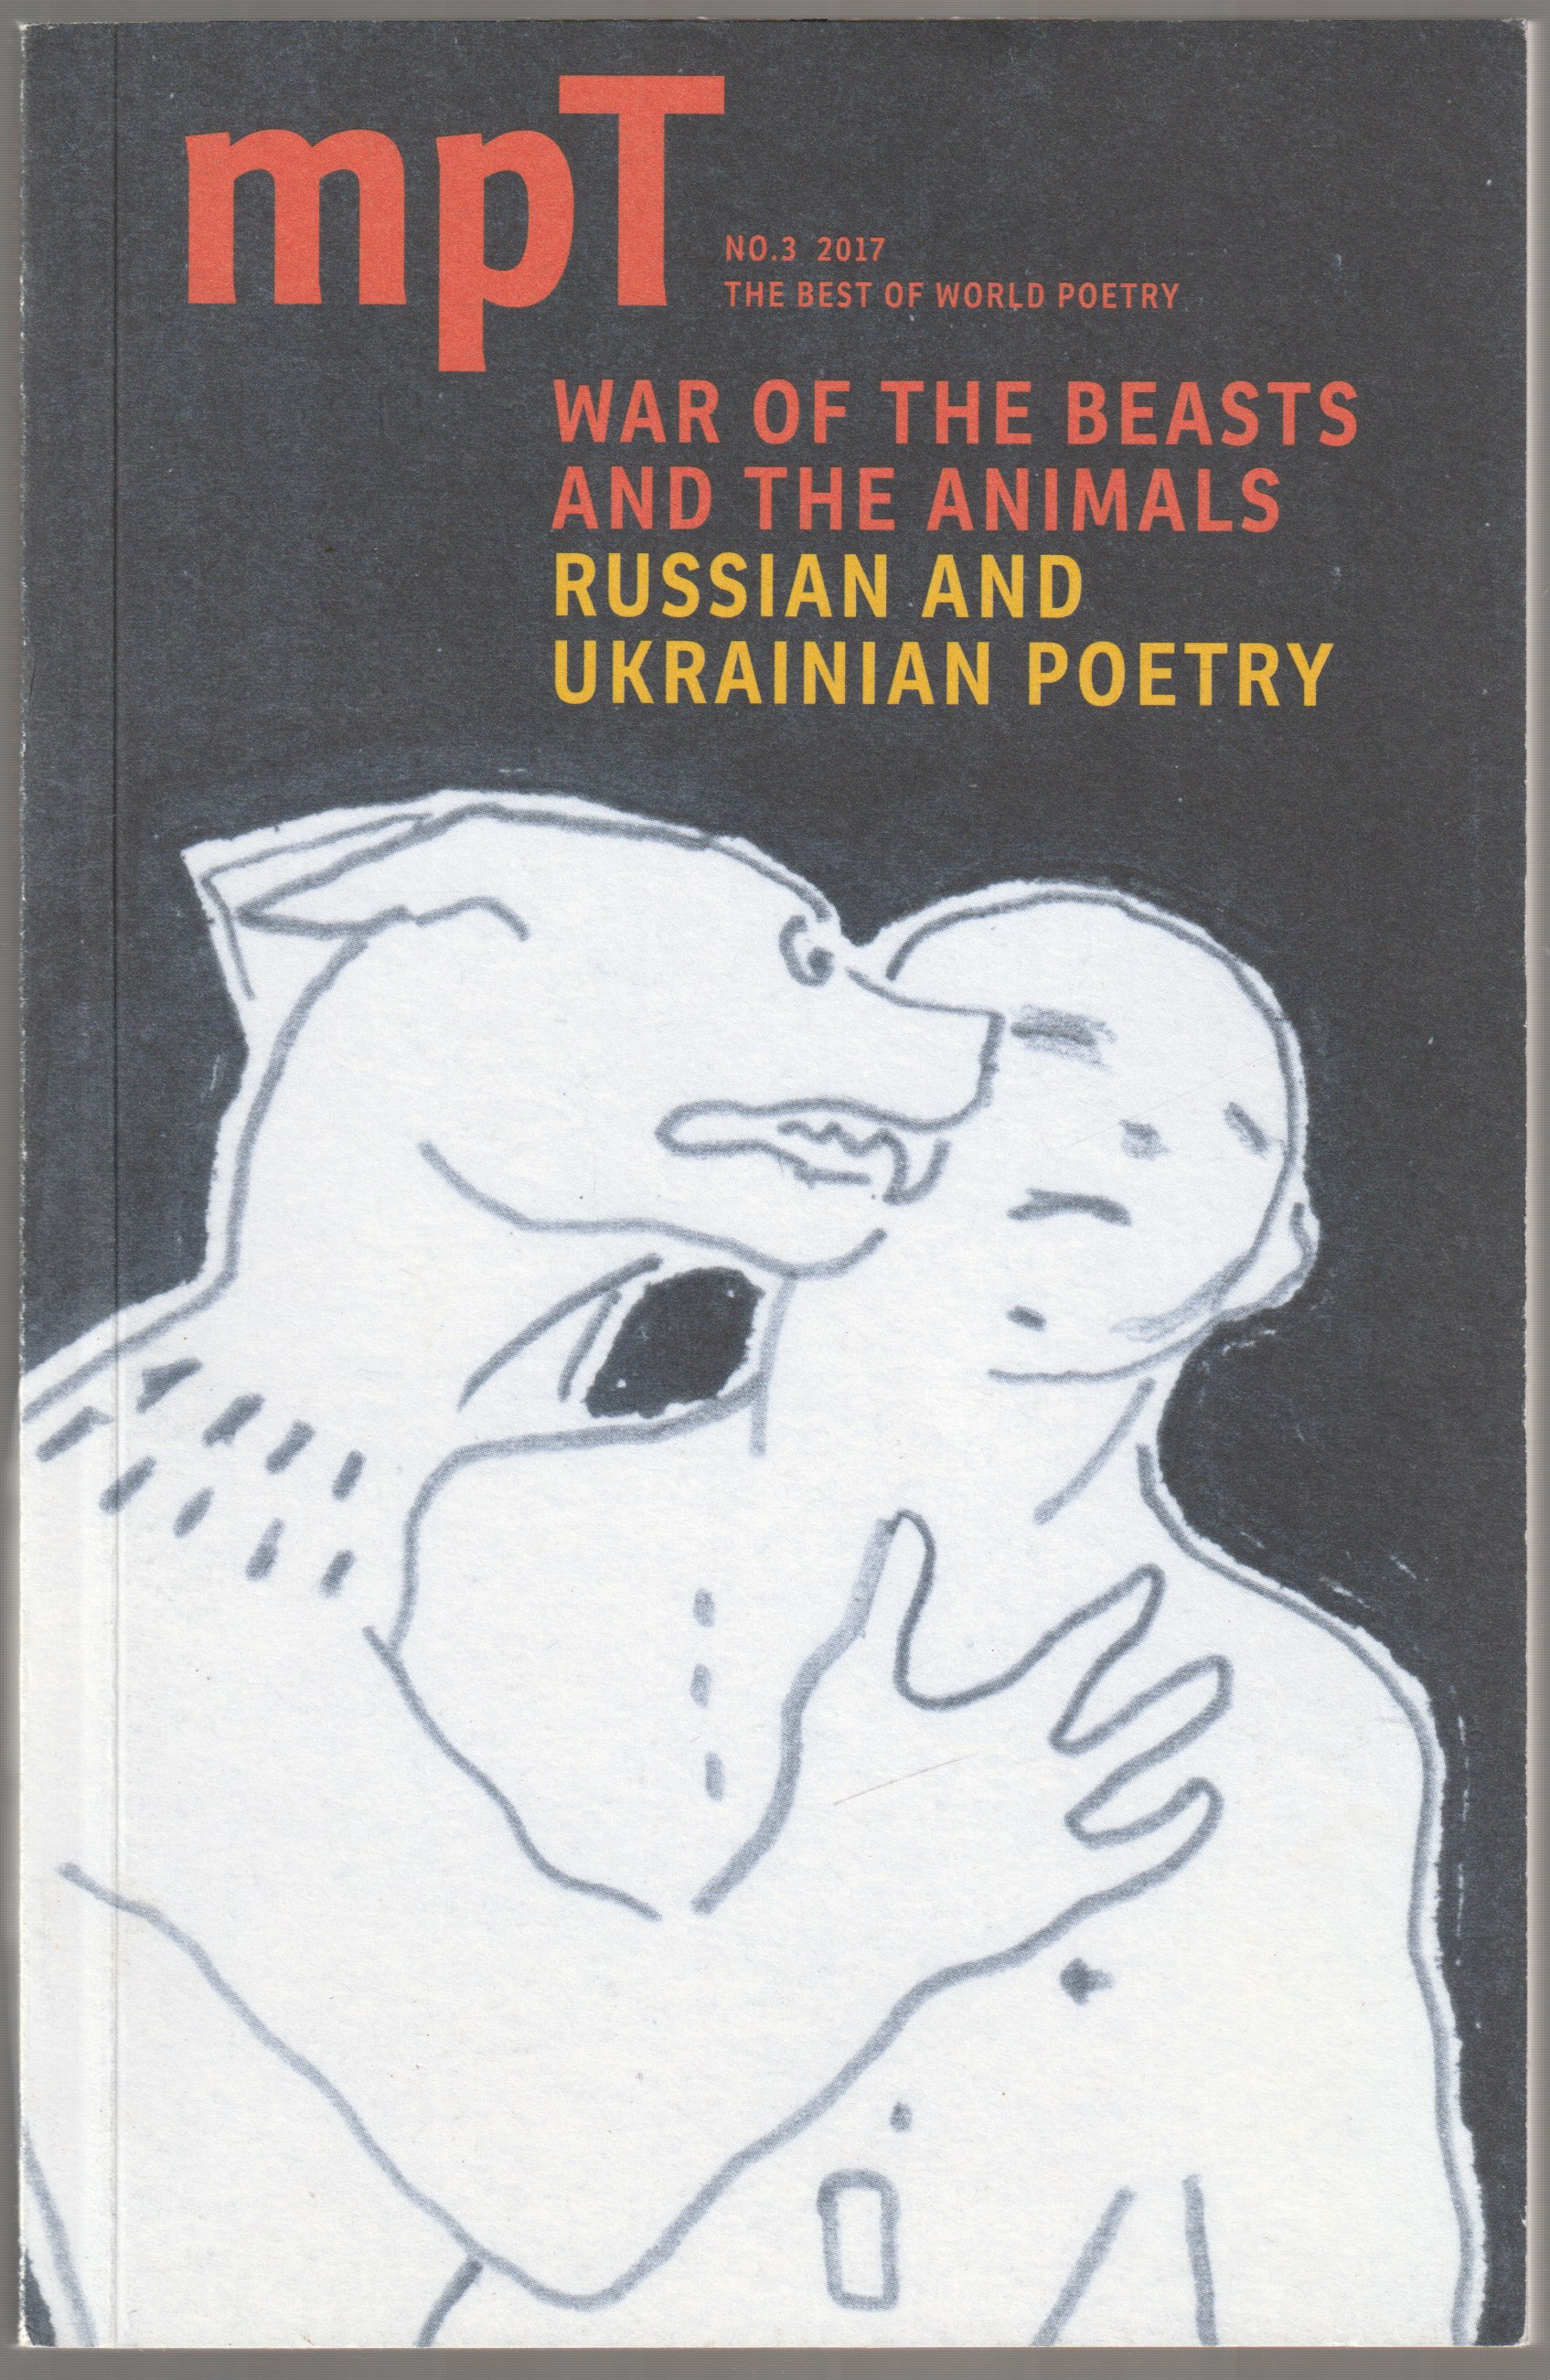 War of the beasts and the animals : Russian and Ukrainian poetry.